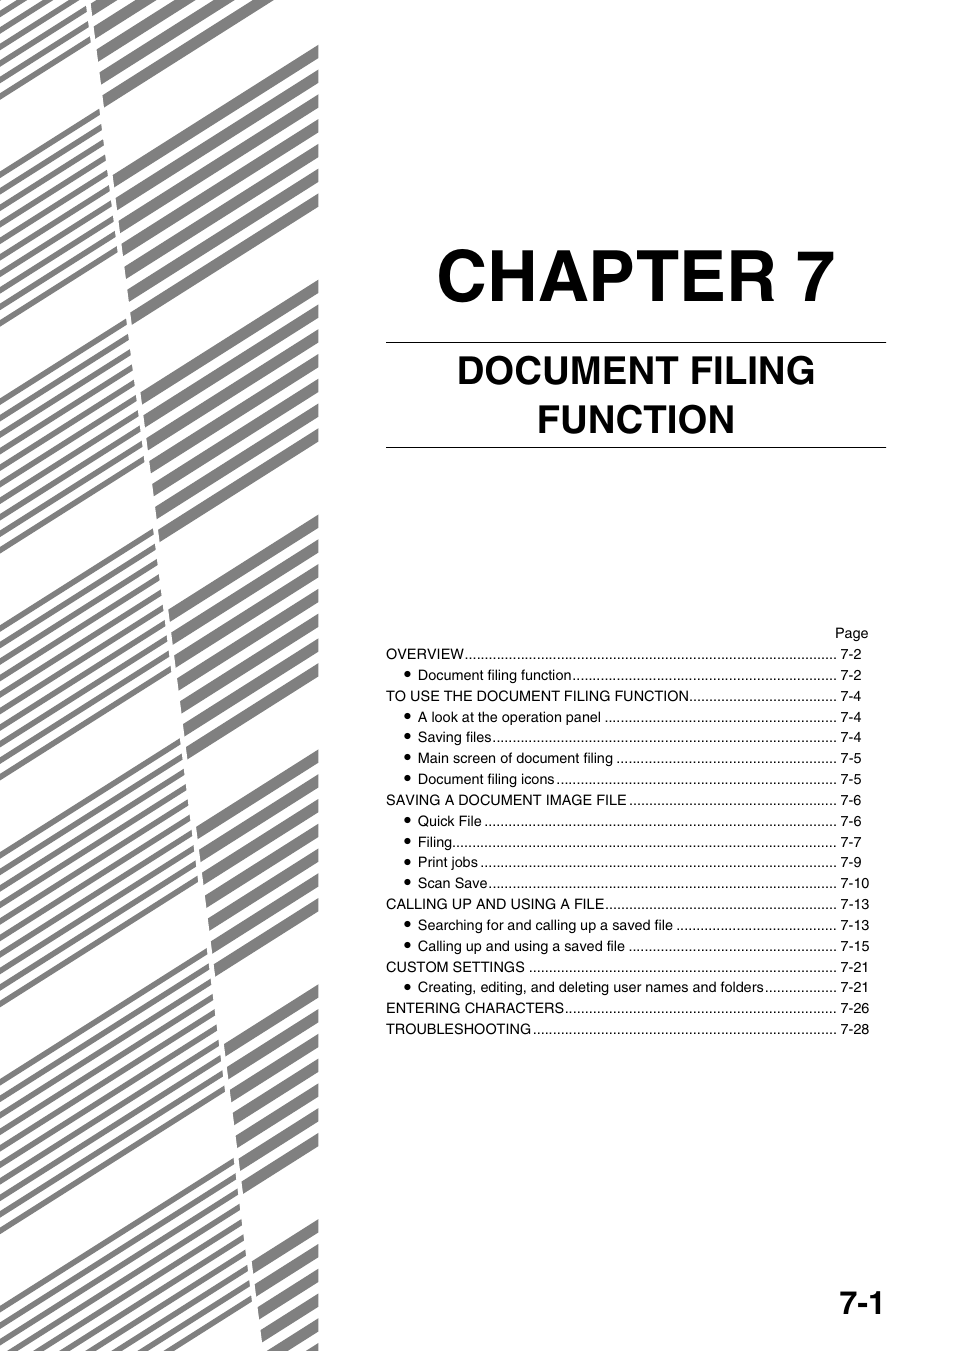 Document filing, Function, Chapter 7 document filing function | Chapter 7, Document filing function | Sharp AR-M700N User Manual | Page 135 / 172